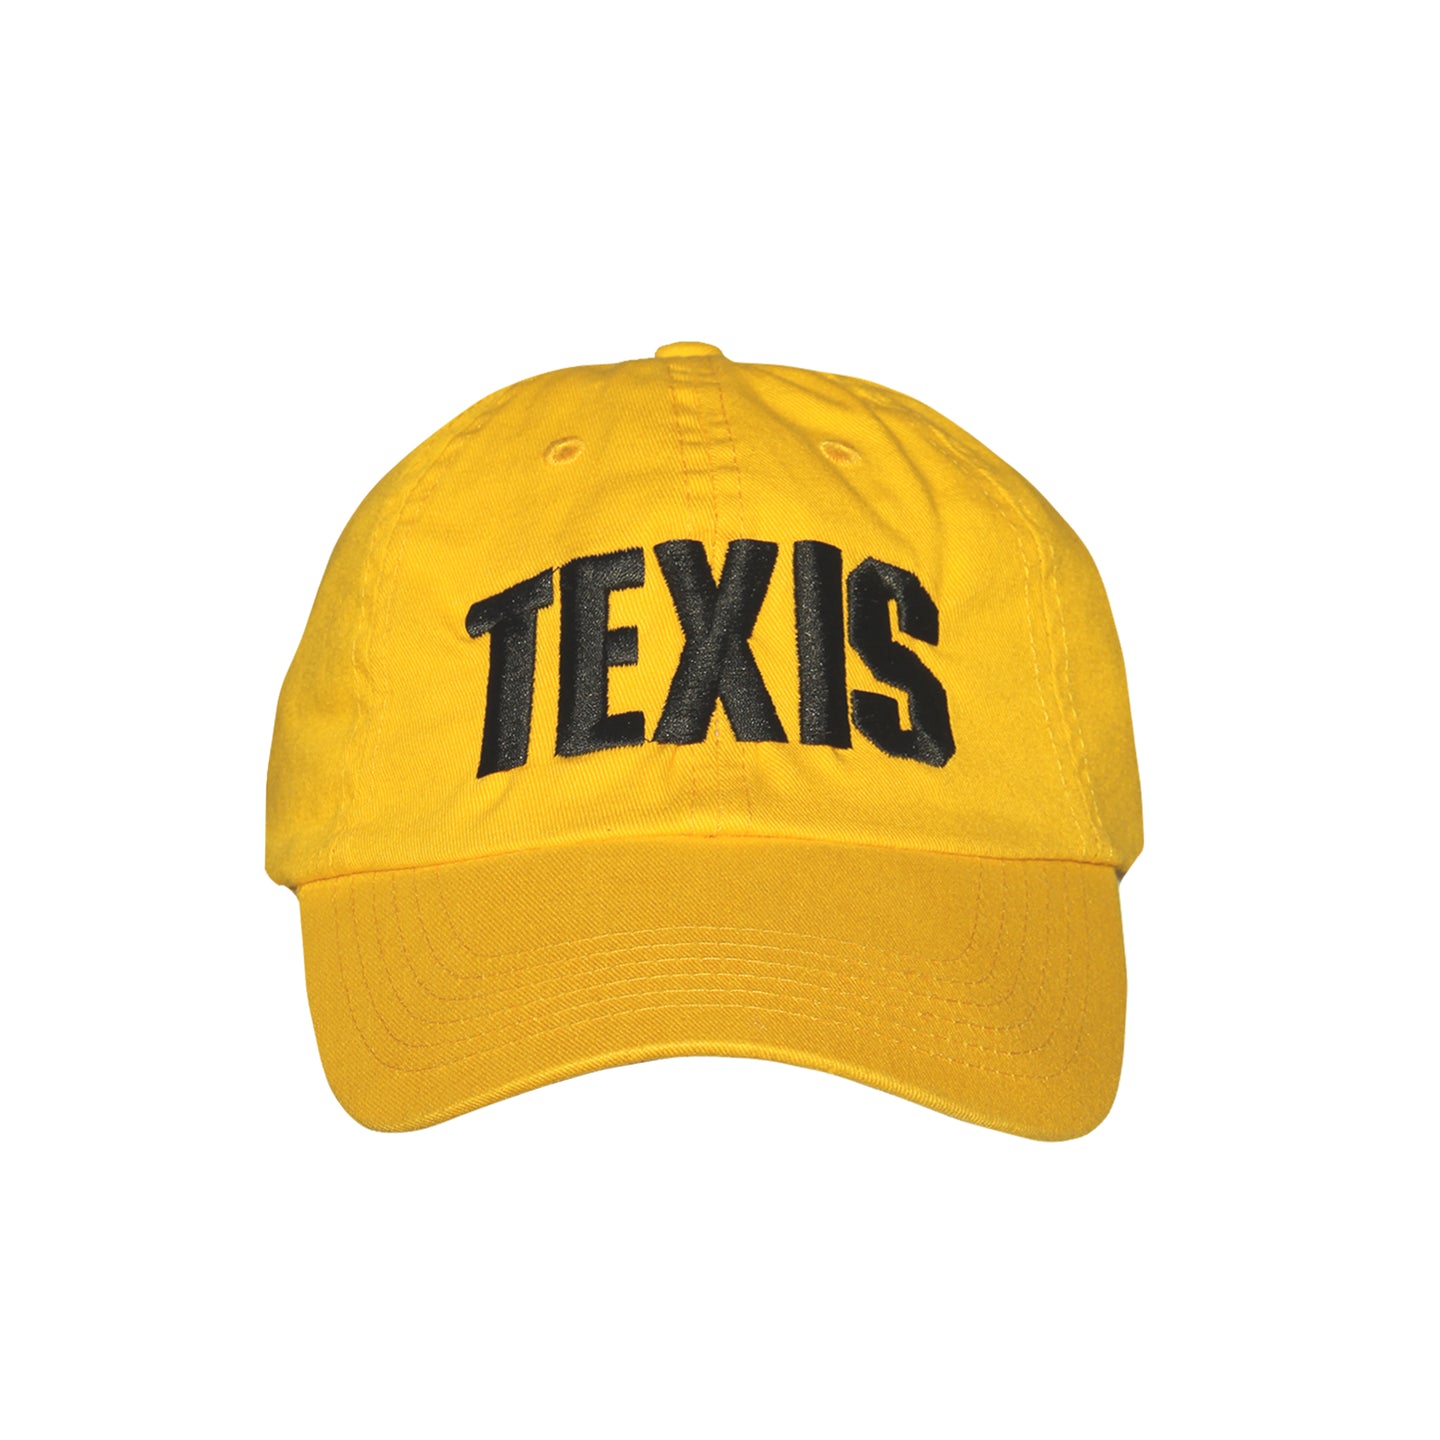 TEXIS Yellow Dad Hat